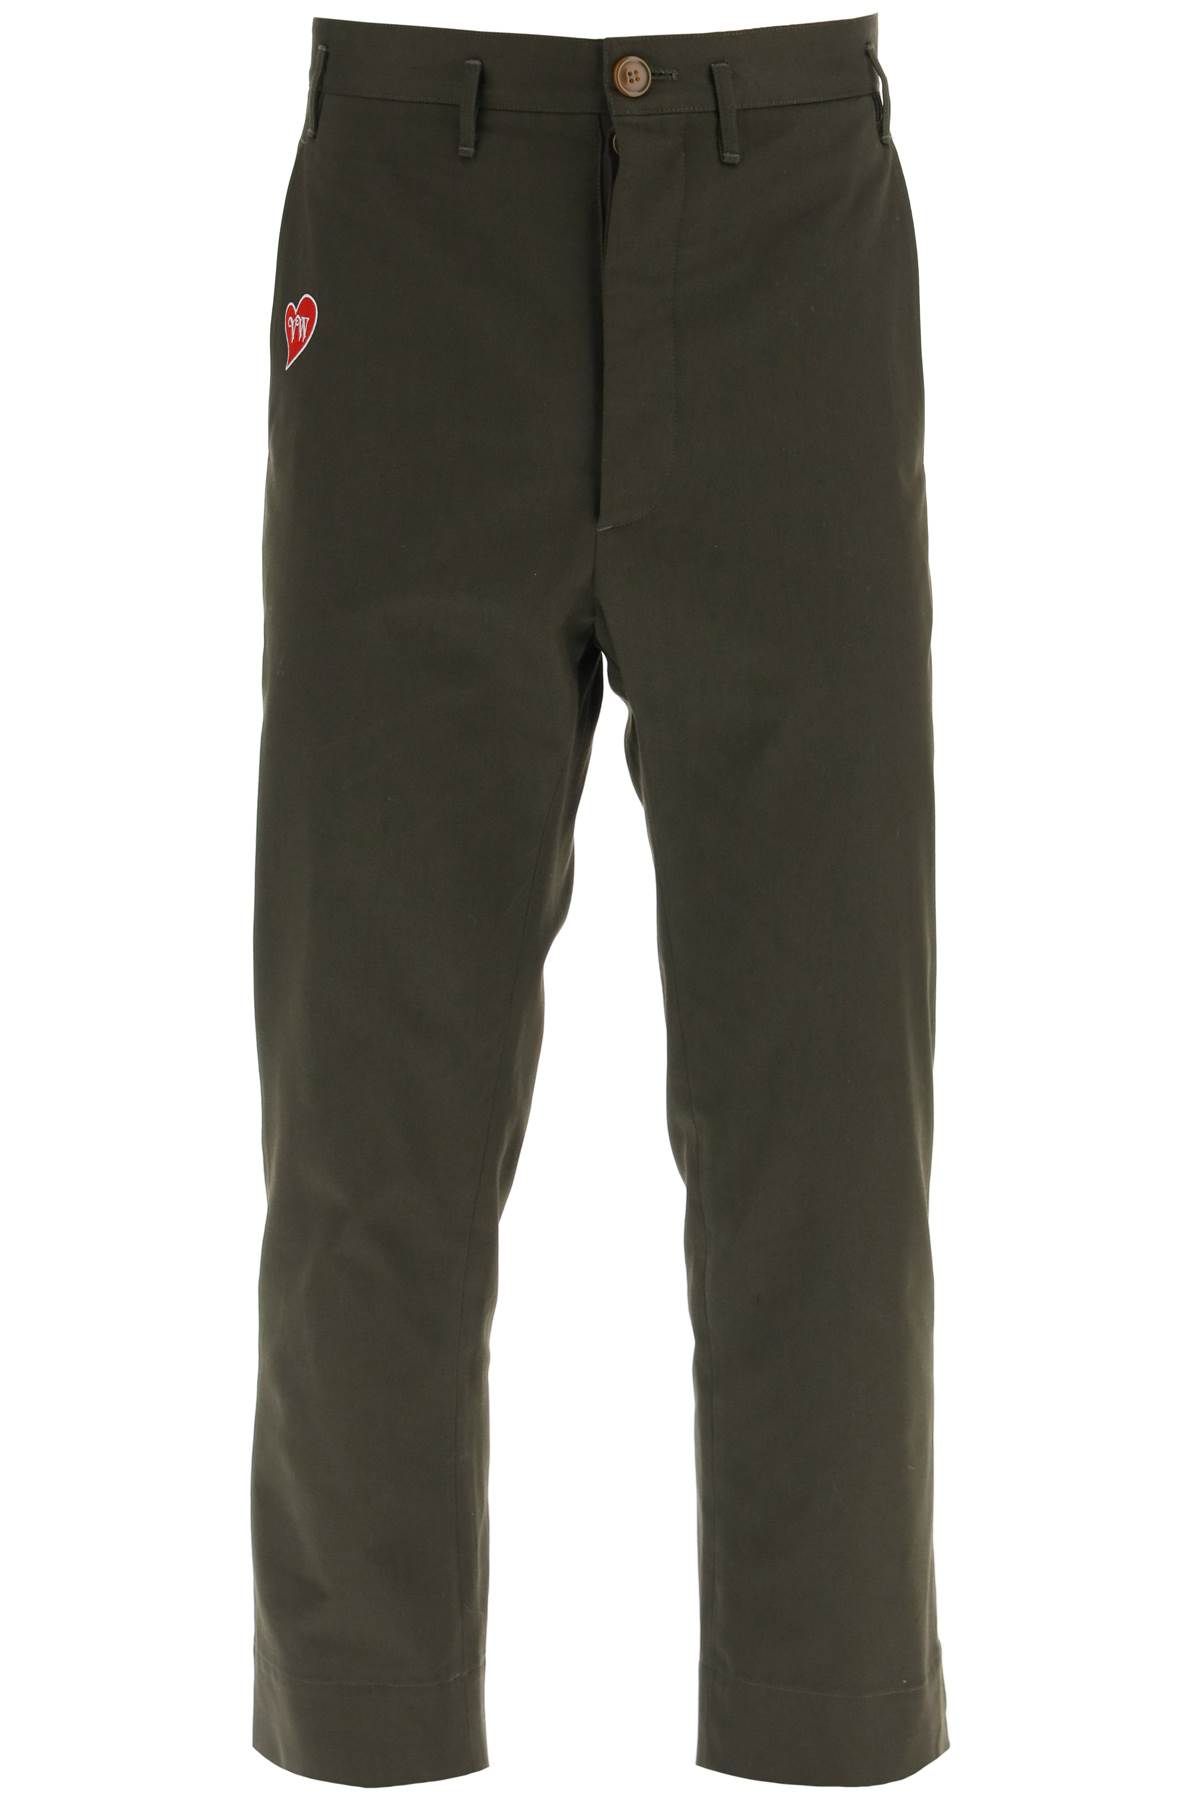 Shop Vivienne Westwood Cropped Cruise Pants Featuring Embroidered Heart-shaped Logo In Green